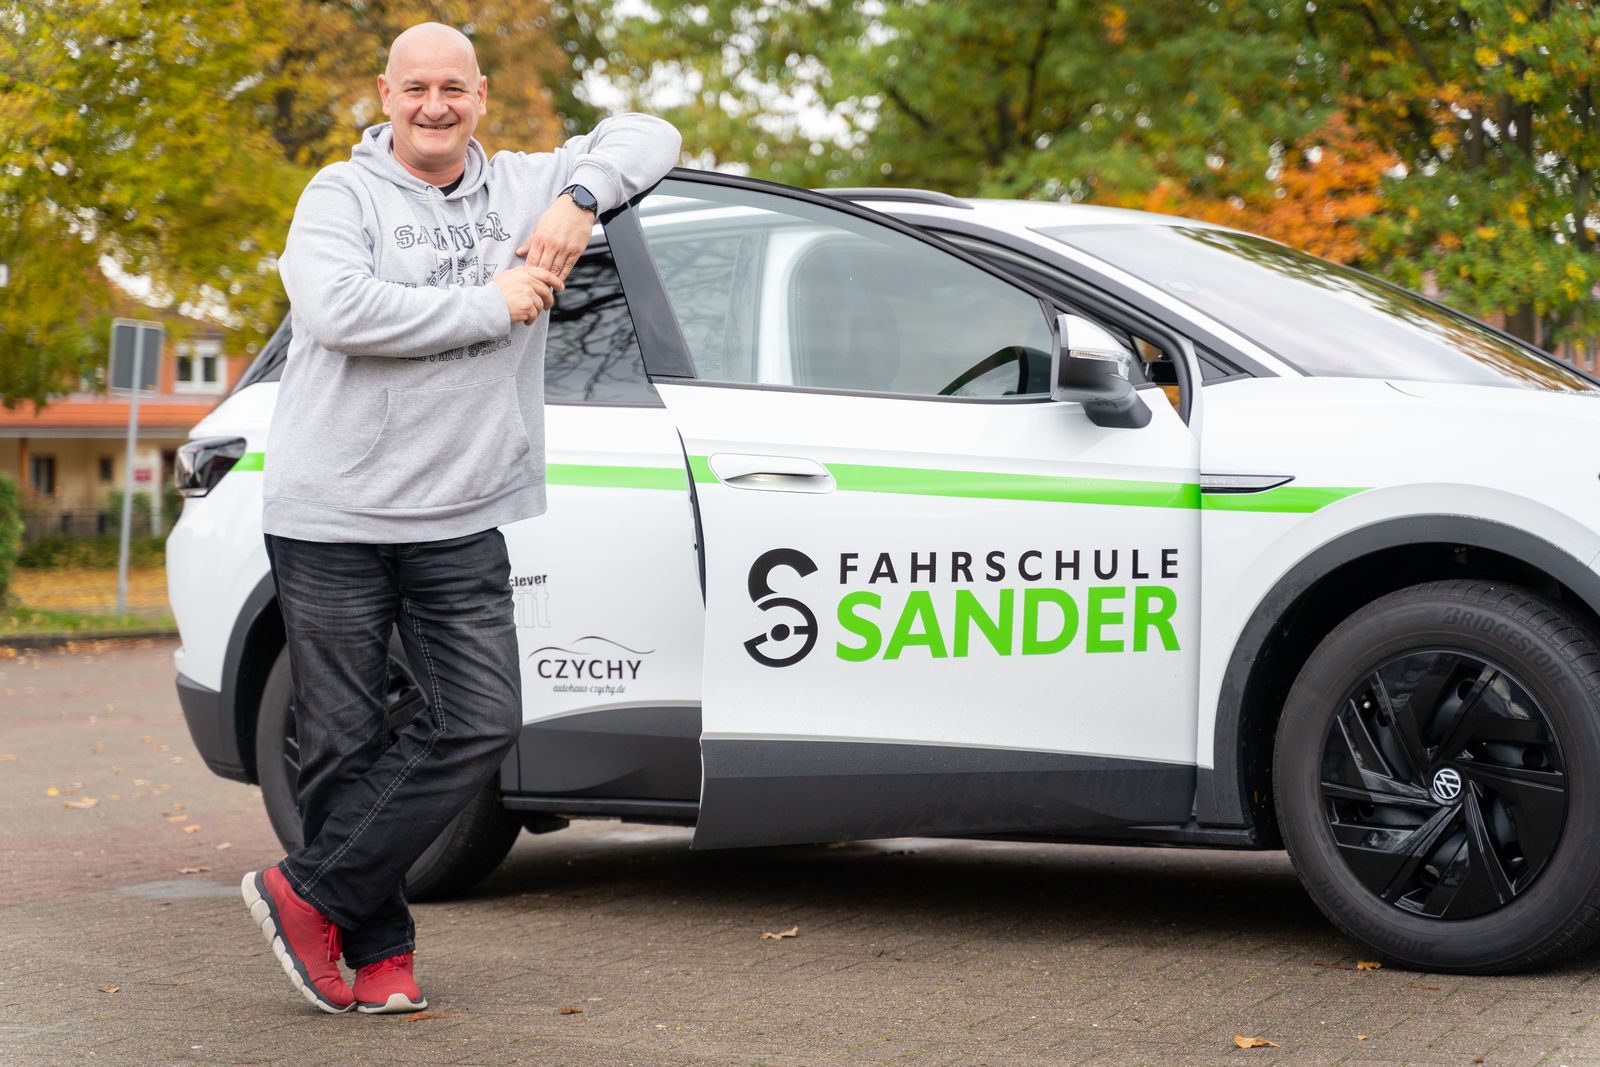 Learning to drive in an electric car - “E-mobility in driving schools is a hot topic”